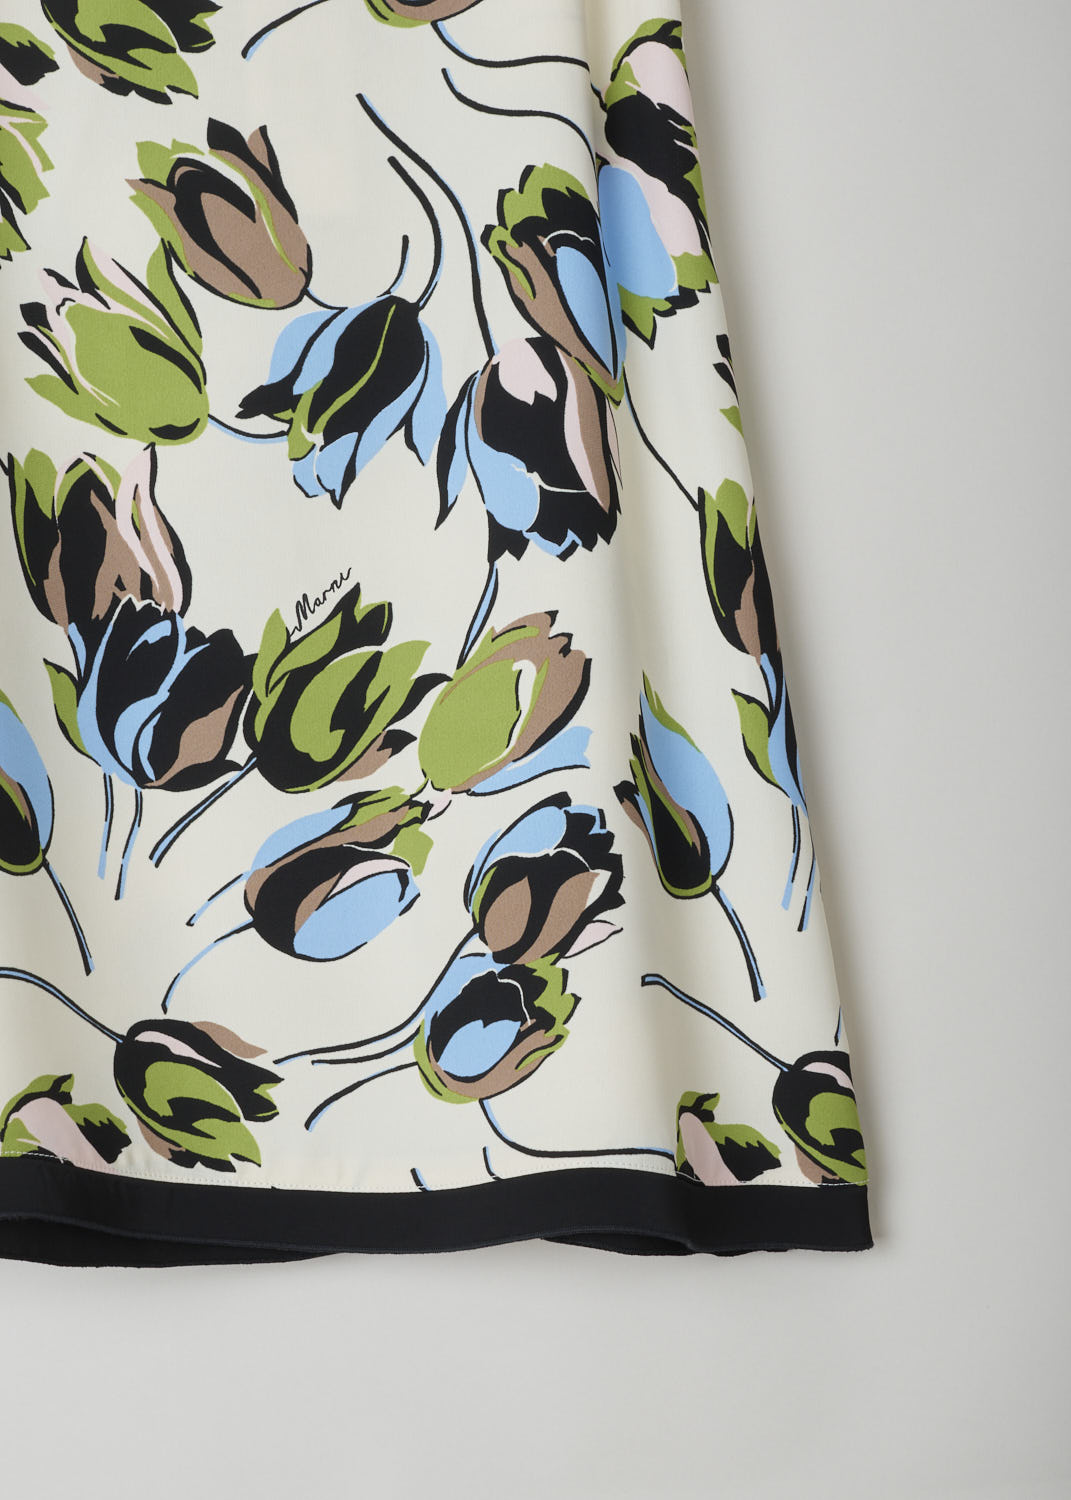 MARNI, CREAM COLORED A-LINE MIDI SKIRT, GOMA0042Q0_UTV844_WIW03, Print, Detail, This cream colored A-line skirt has a floral print in blues and greens. A concealed side zip functions as the closing option. The skirt has a black satin hemline. 
